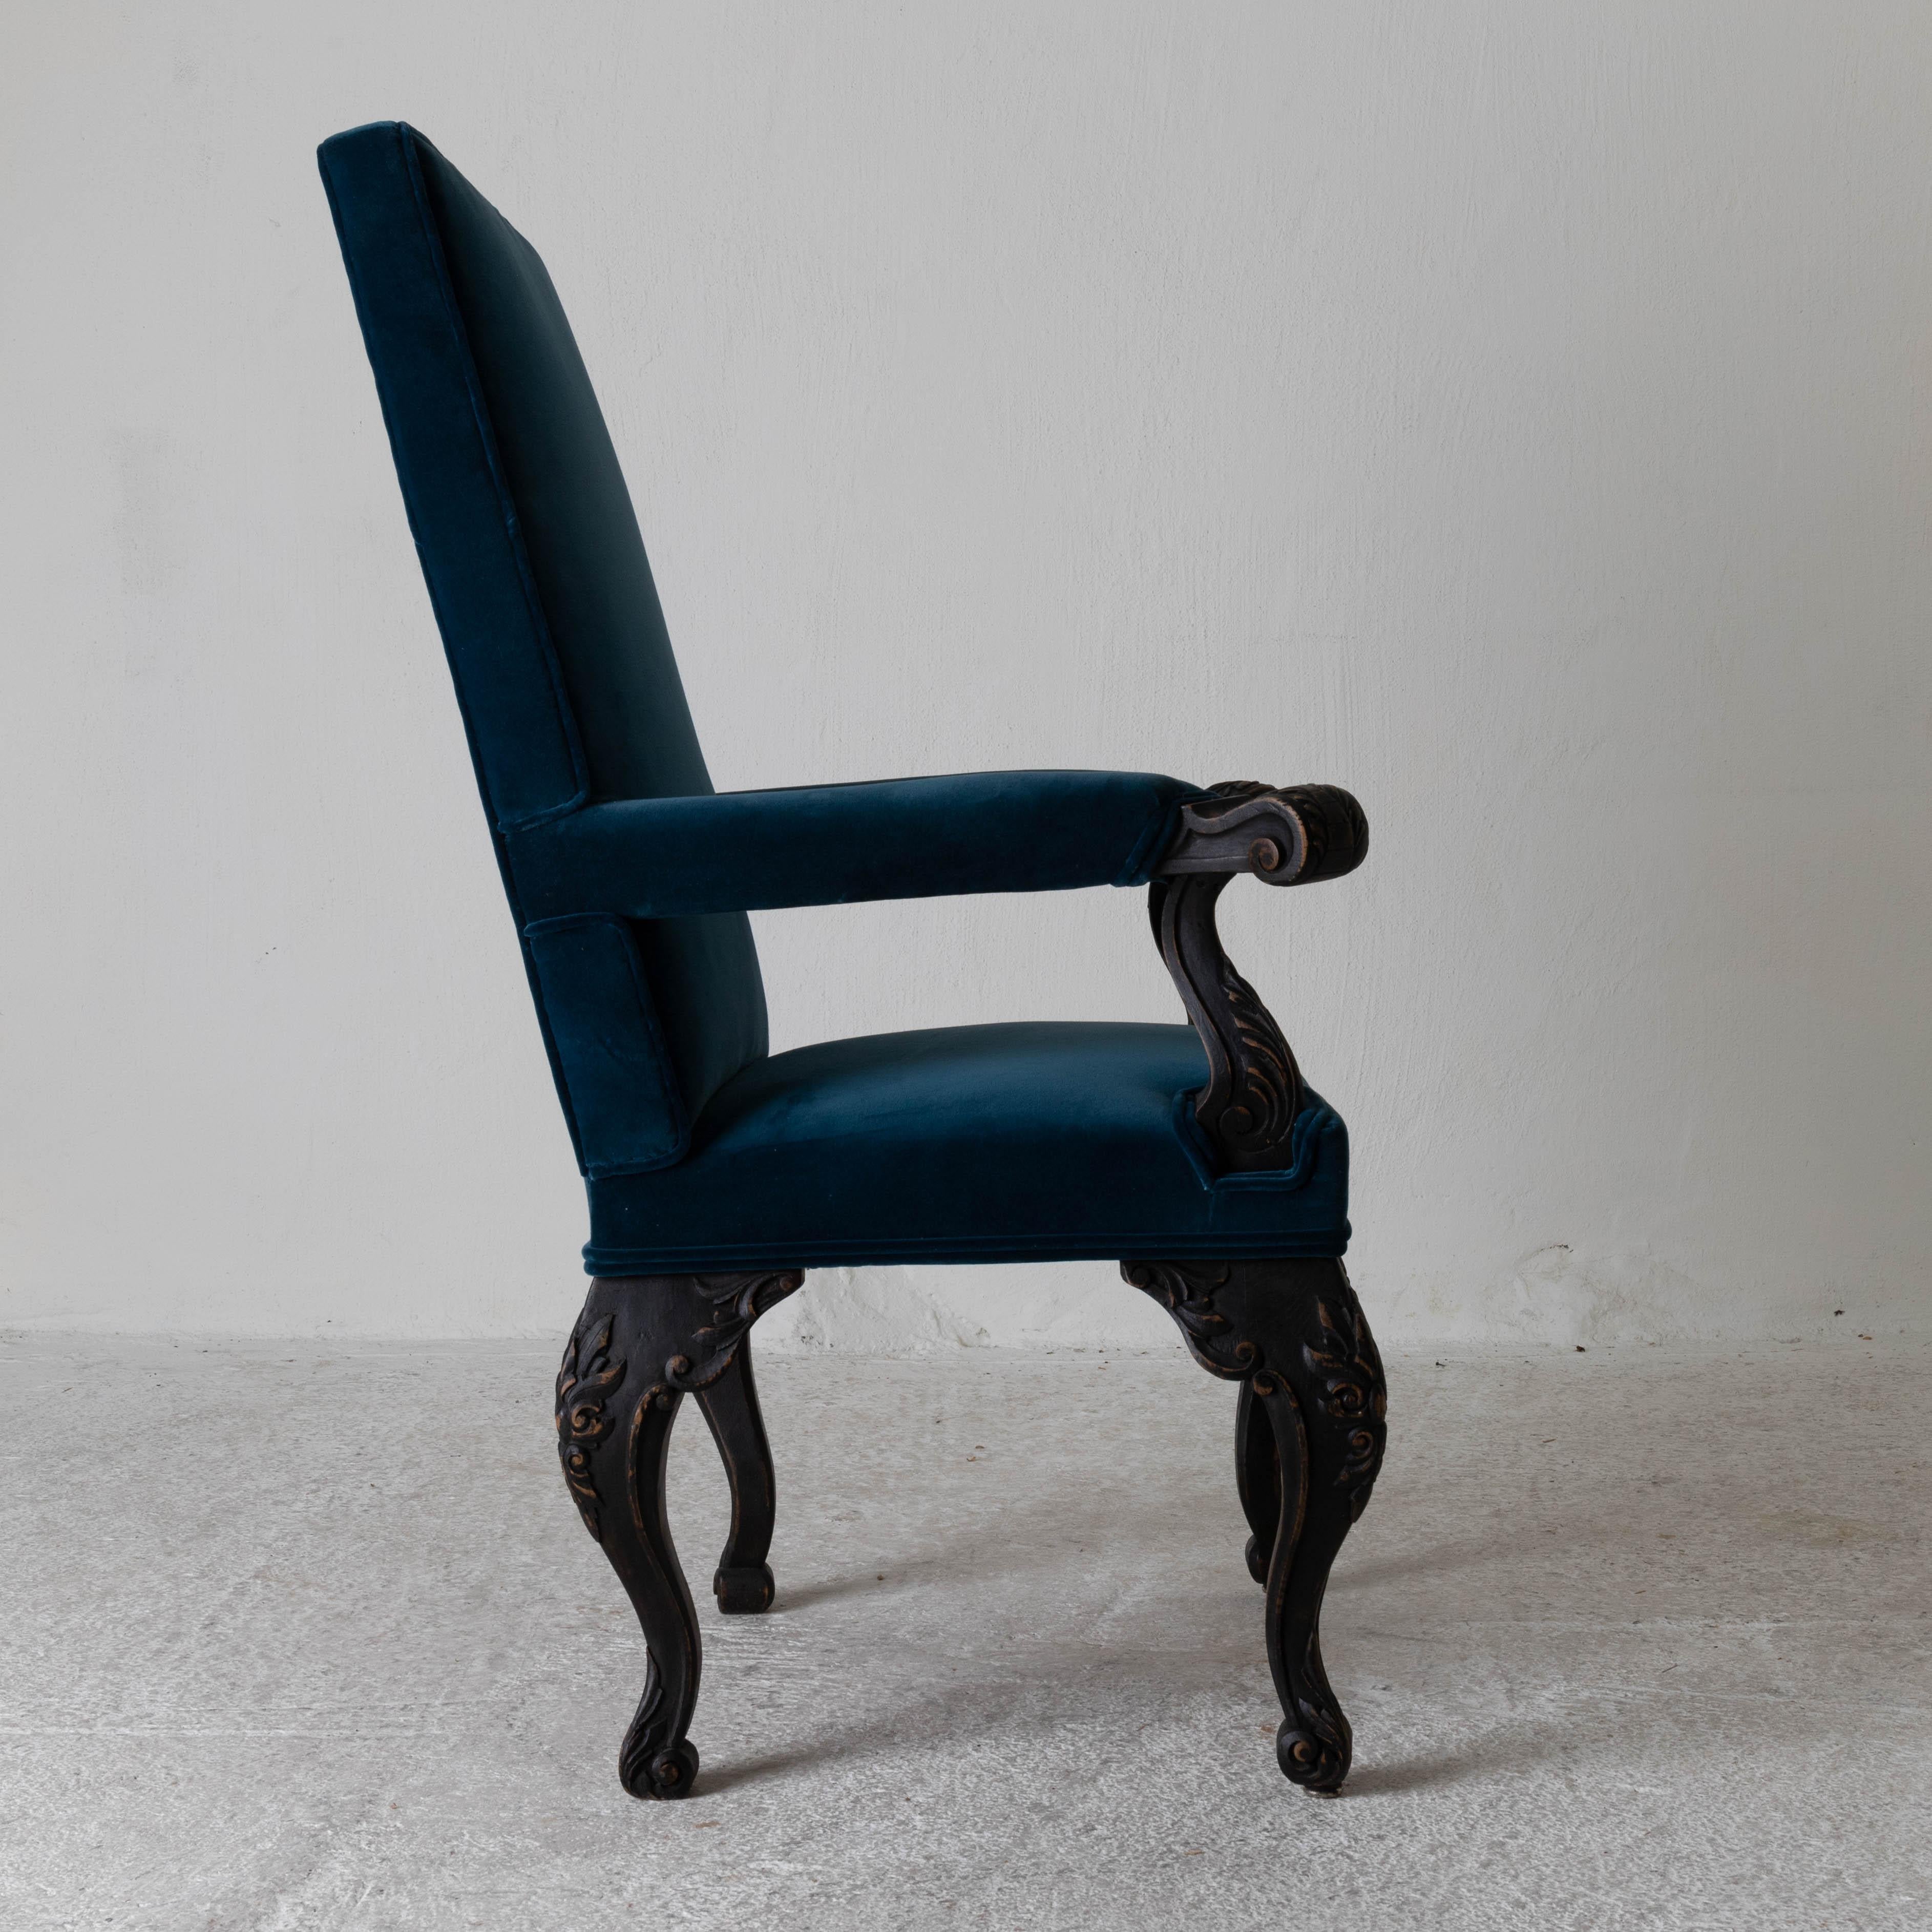 Hand-Painted Chair Armchair Swedish 19th Century Black Frame Blue Upholstery Sweden